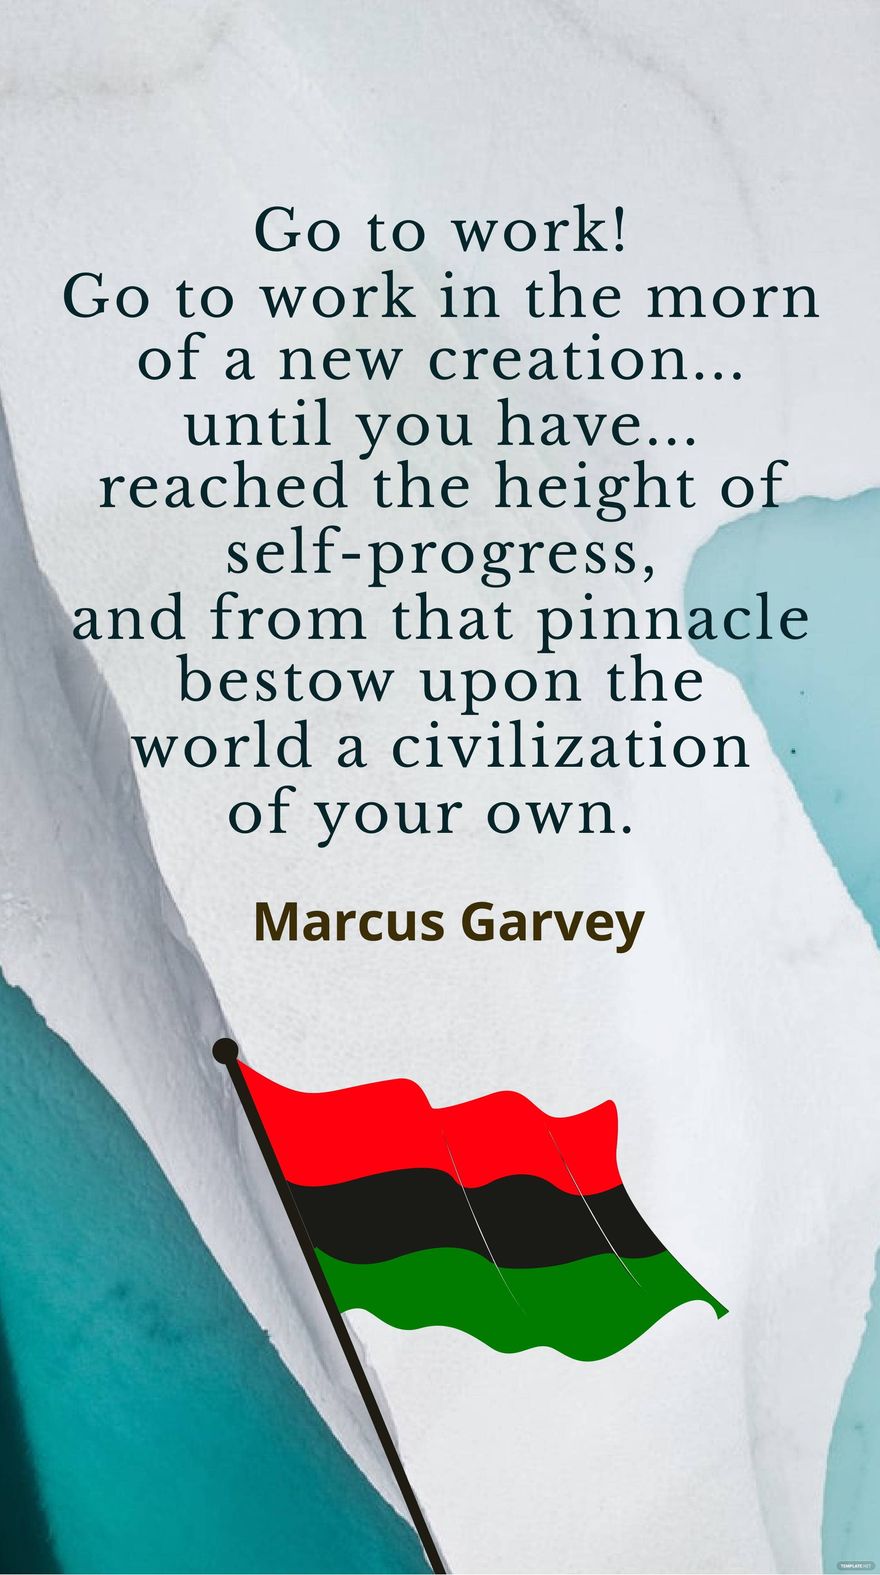 Marcus Garvey - Go to work! Go to work in the morn of a new creation... until you have... reached the height of self-progress, and from that pinnacle bestow upon the world a civilization of your own. 